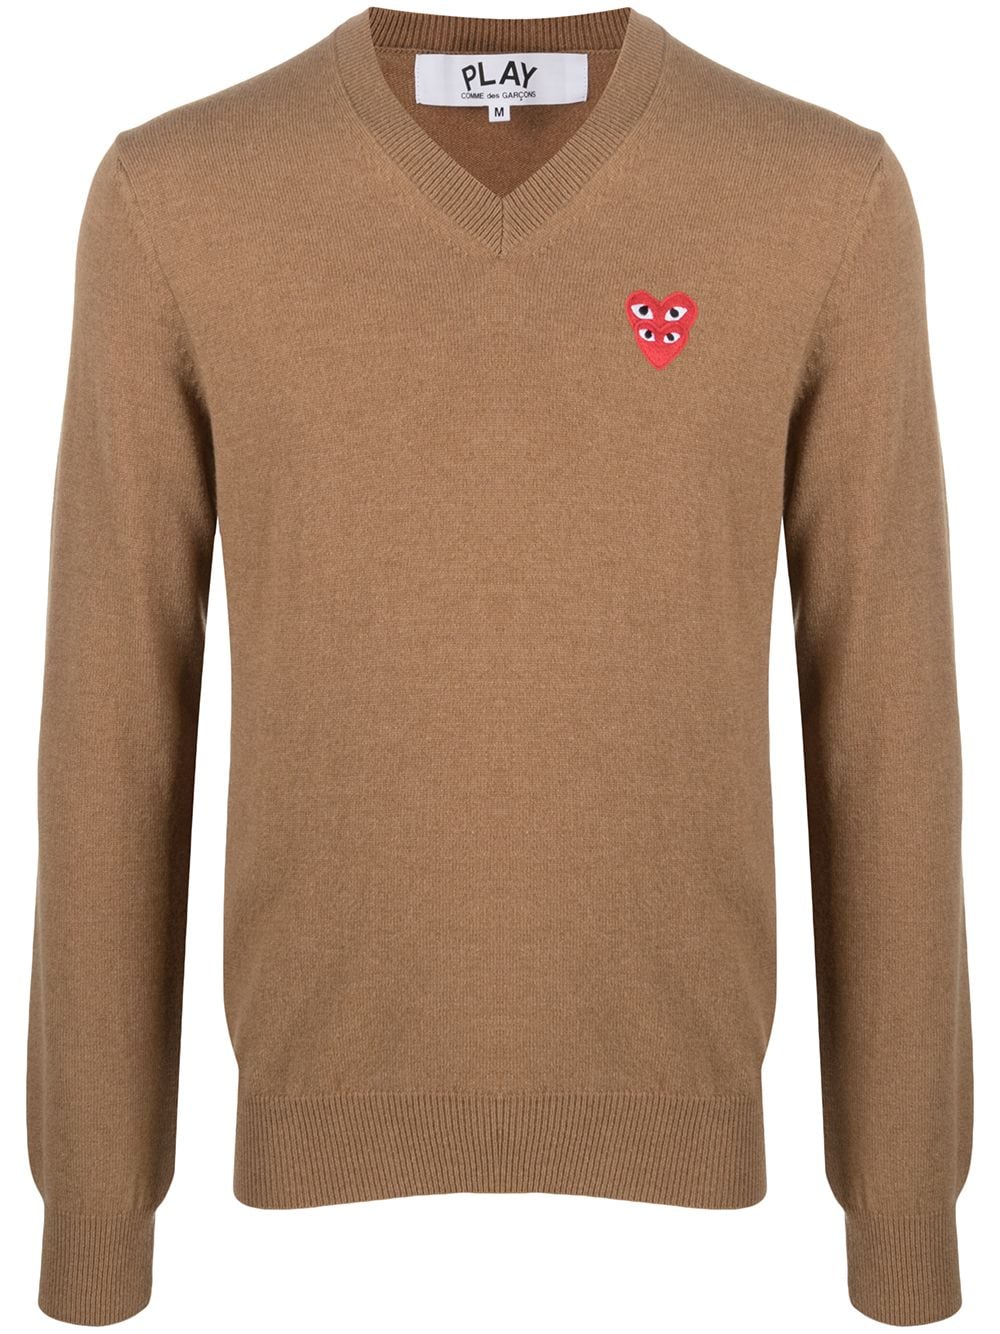 Comme Des Garçons Play fine knit sweater with logo patch - Neutrals von Comme Des Garçons Play